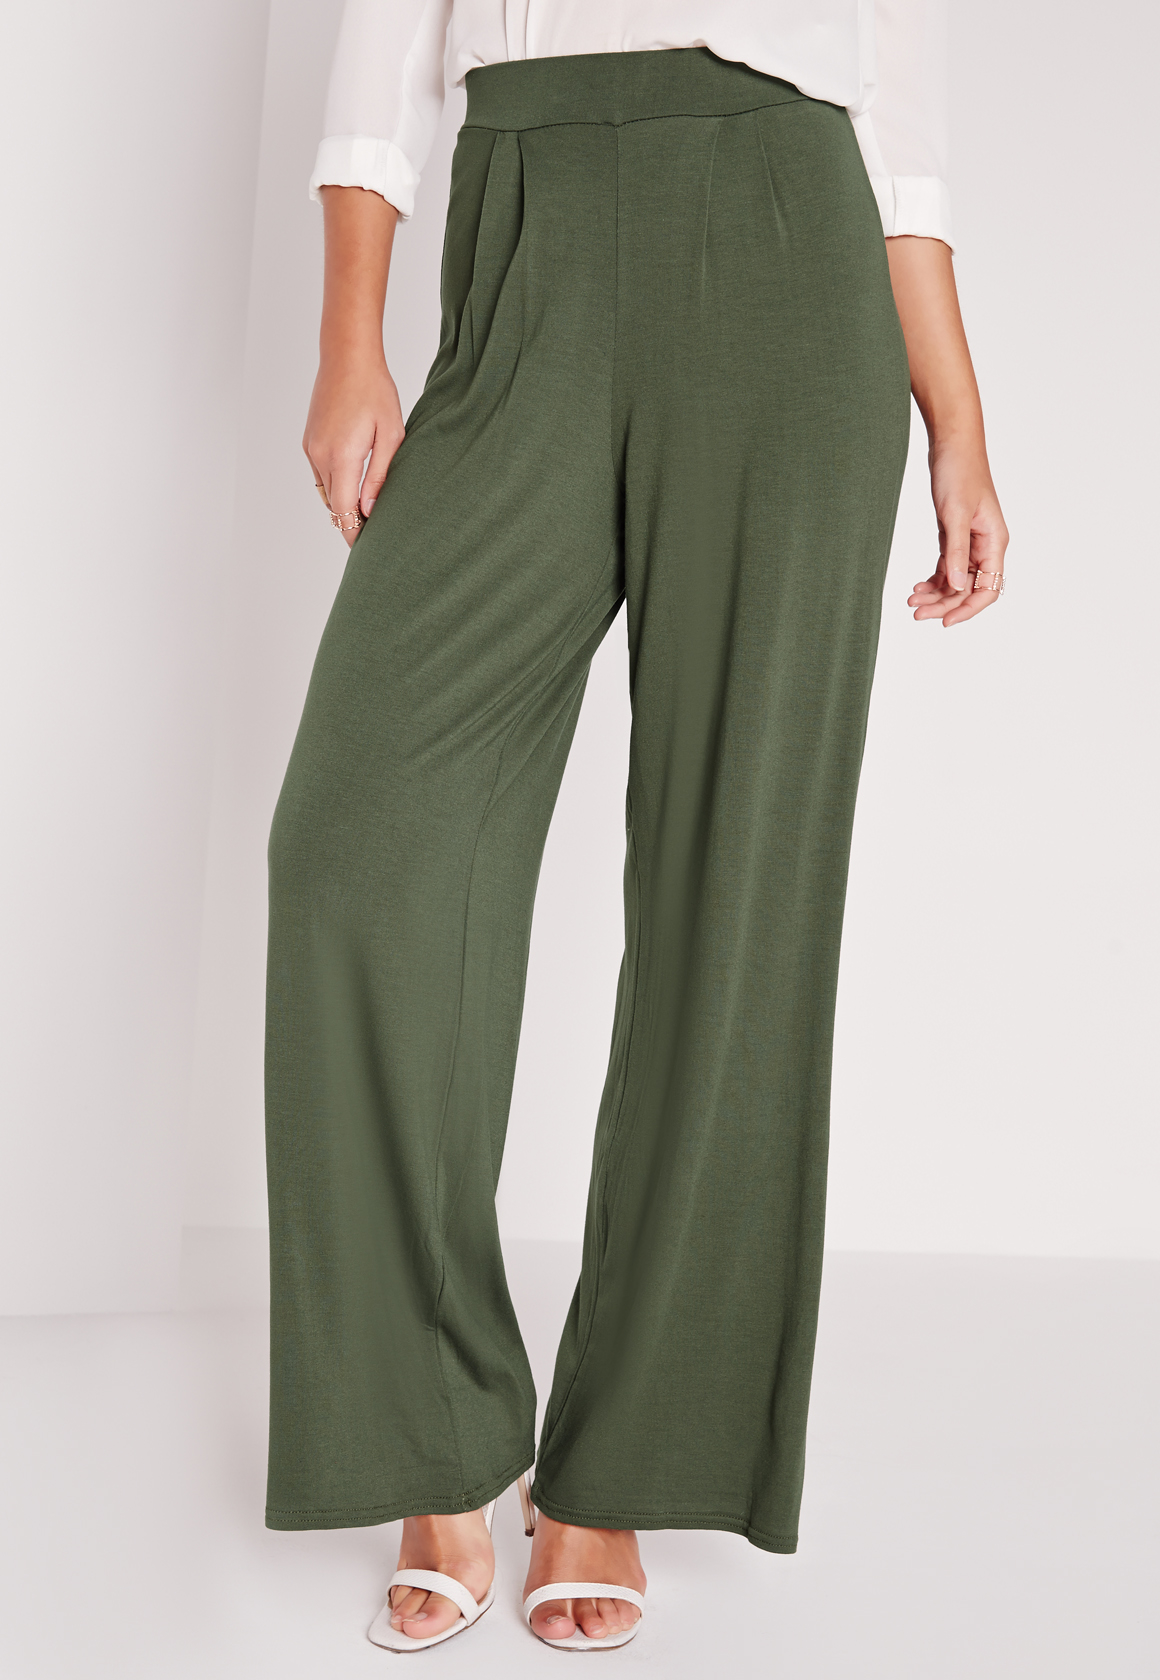 Lyst - Missguided Jersey Wide Leg Trousers Khaki Green in Natural